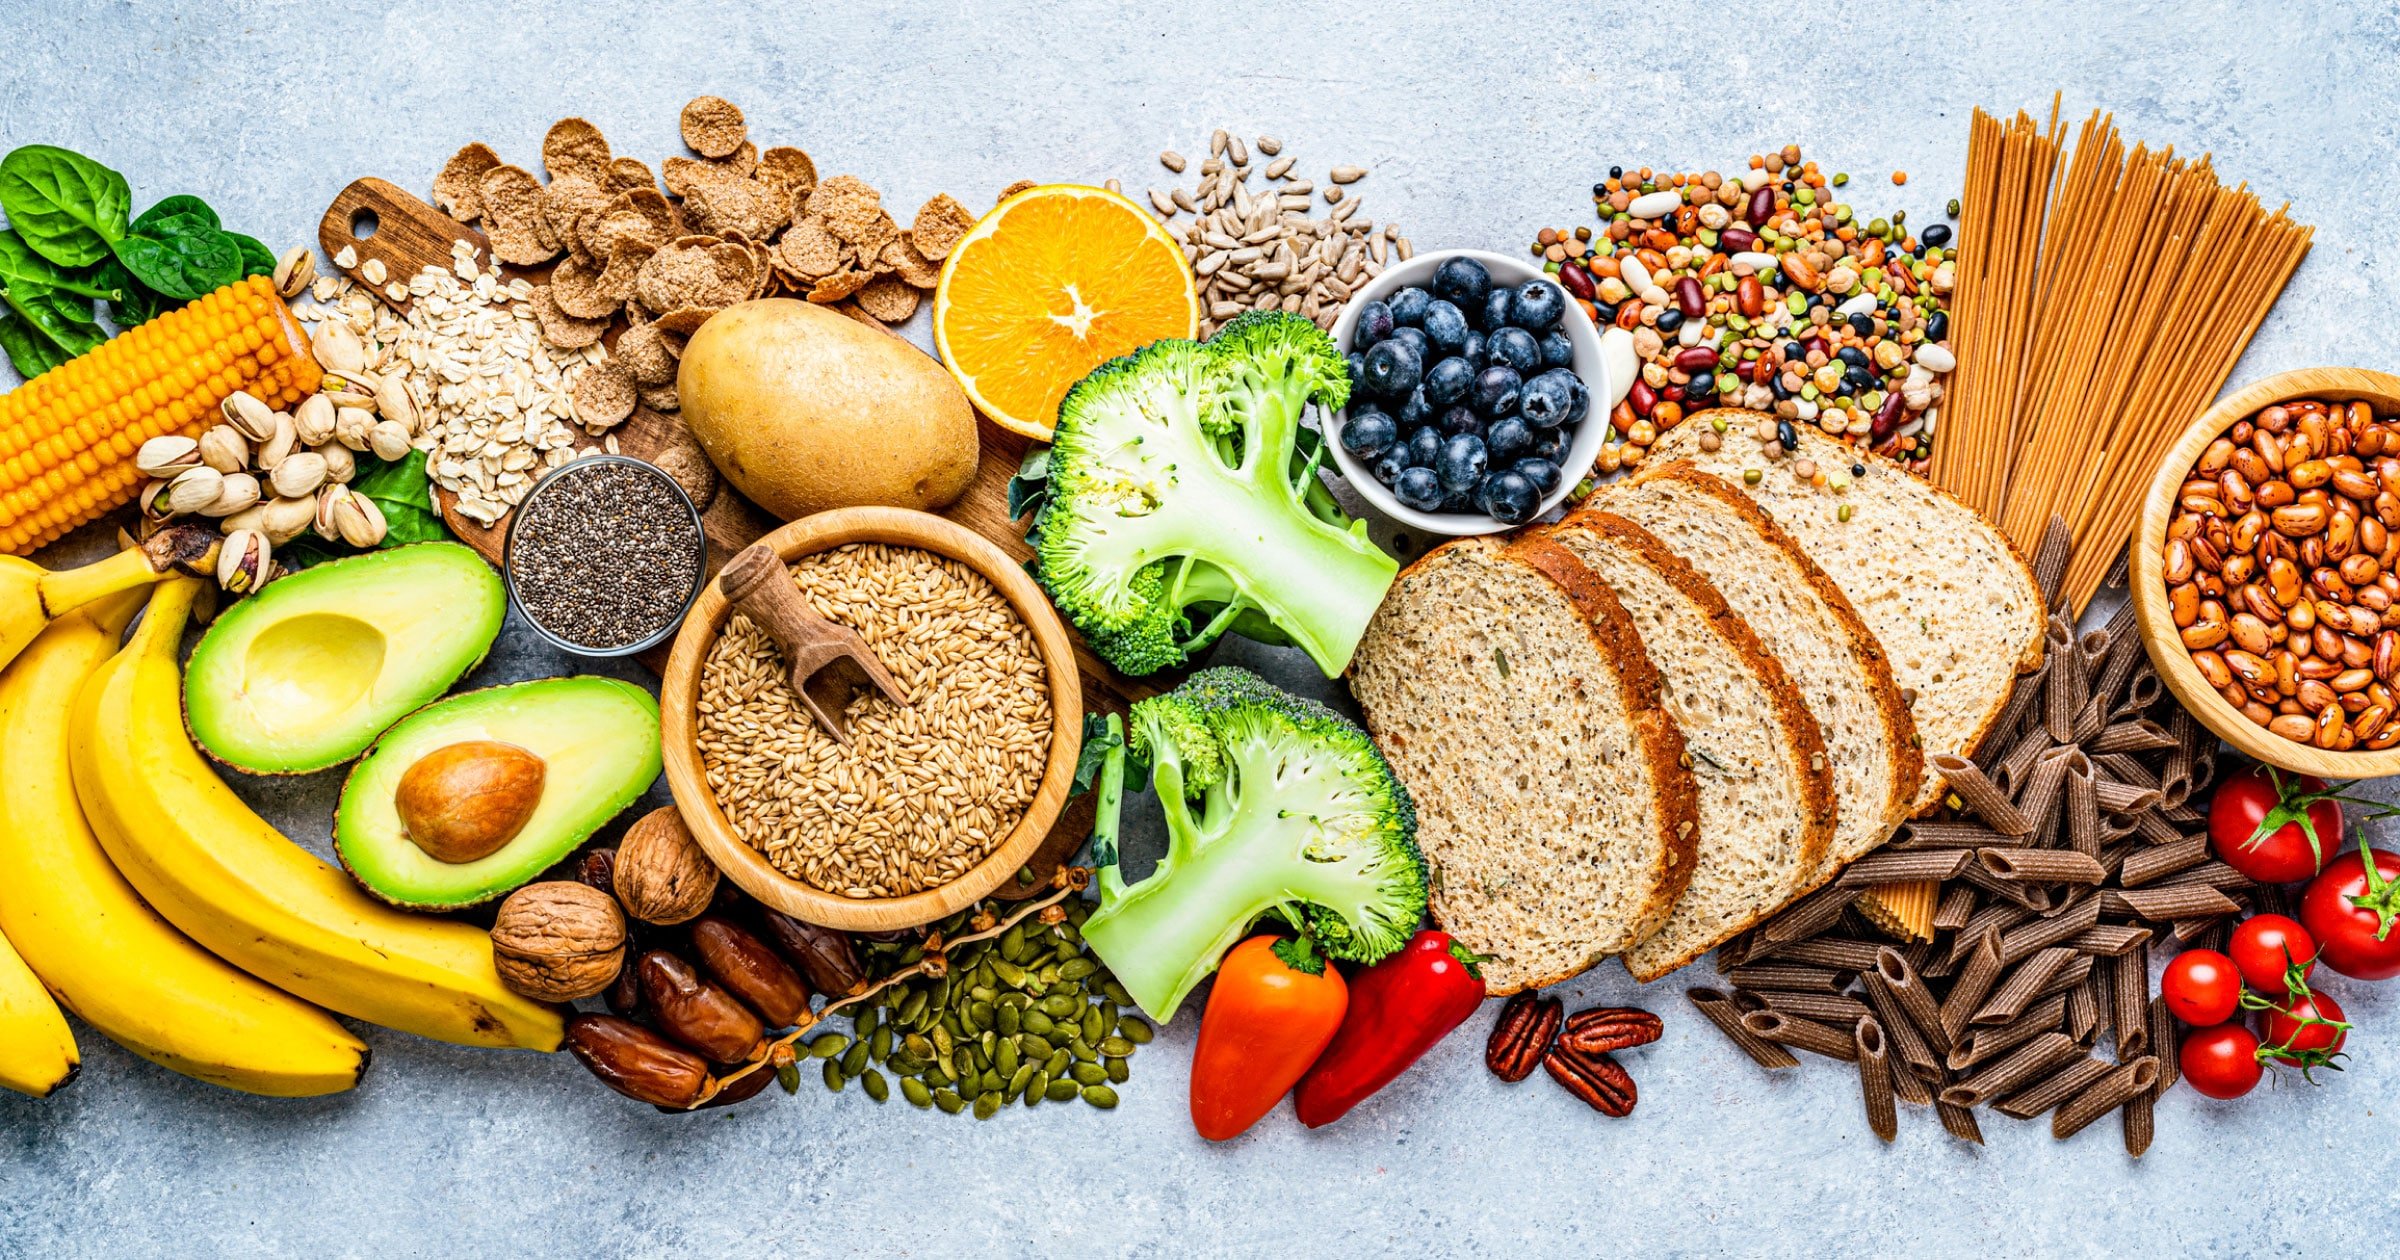 A photo of healthy foods (avocados, whole grains, vegetables, fruit, nuts) gathered together across a clean countertop. 